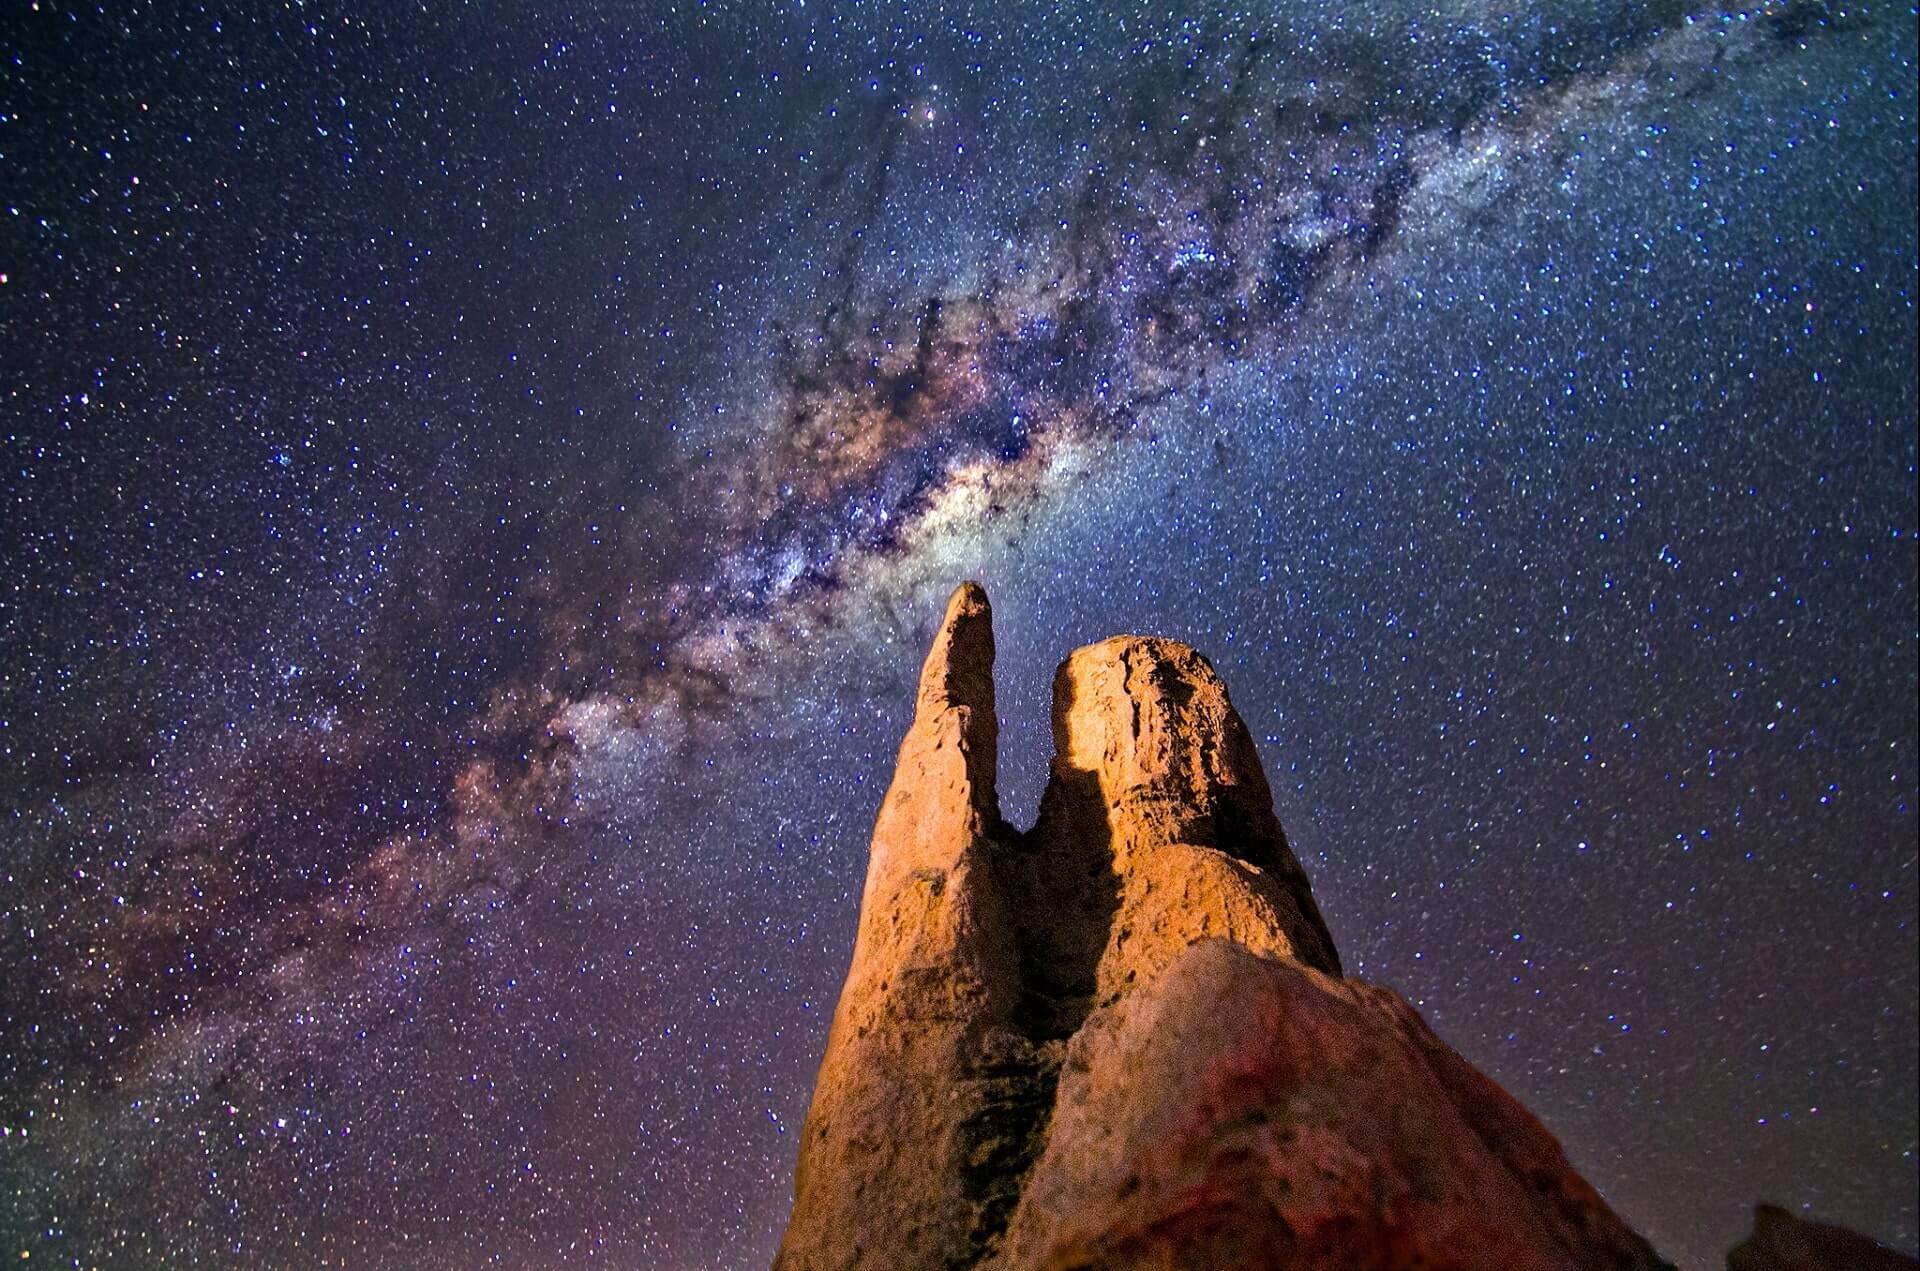 Arizona rock formation with Milky Way in background